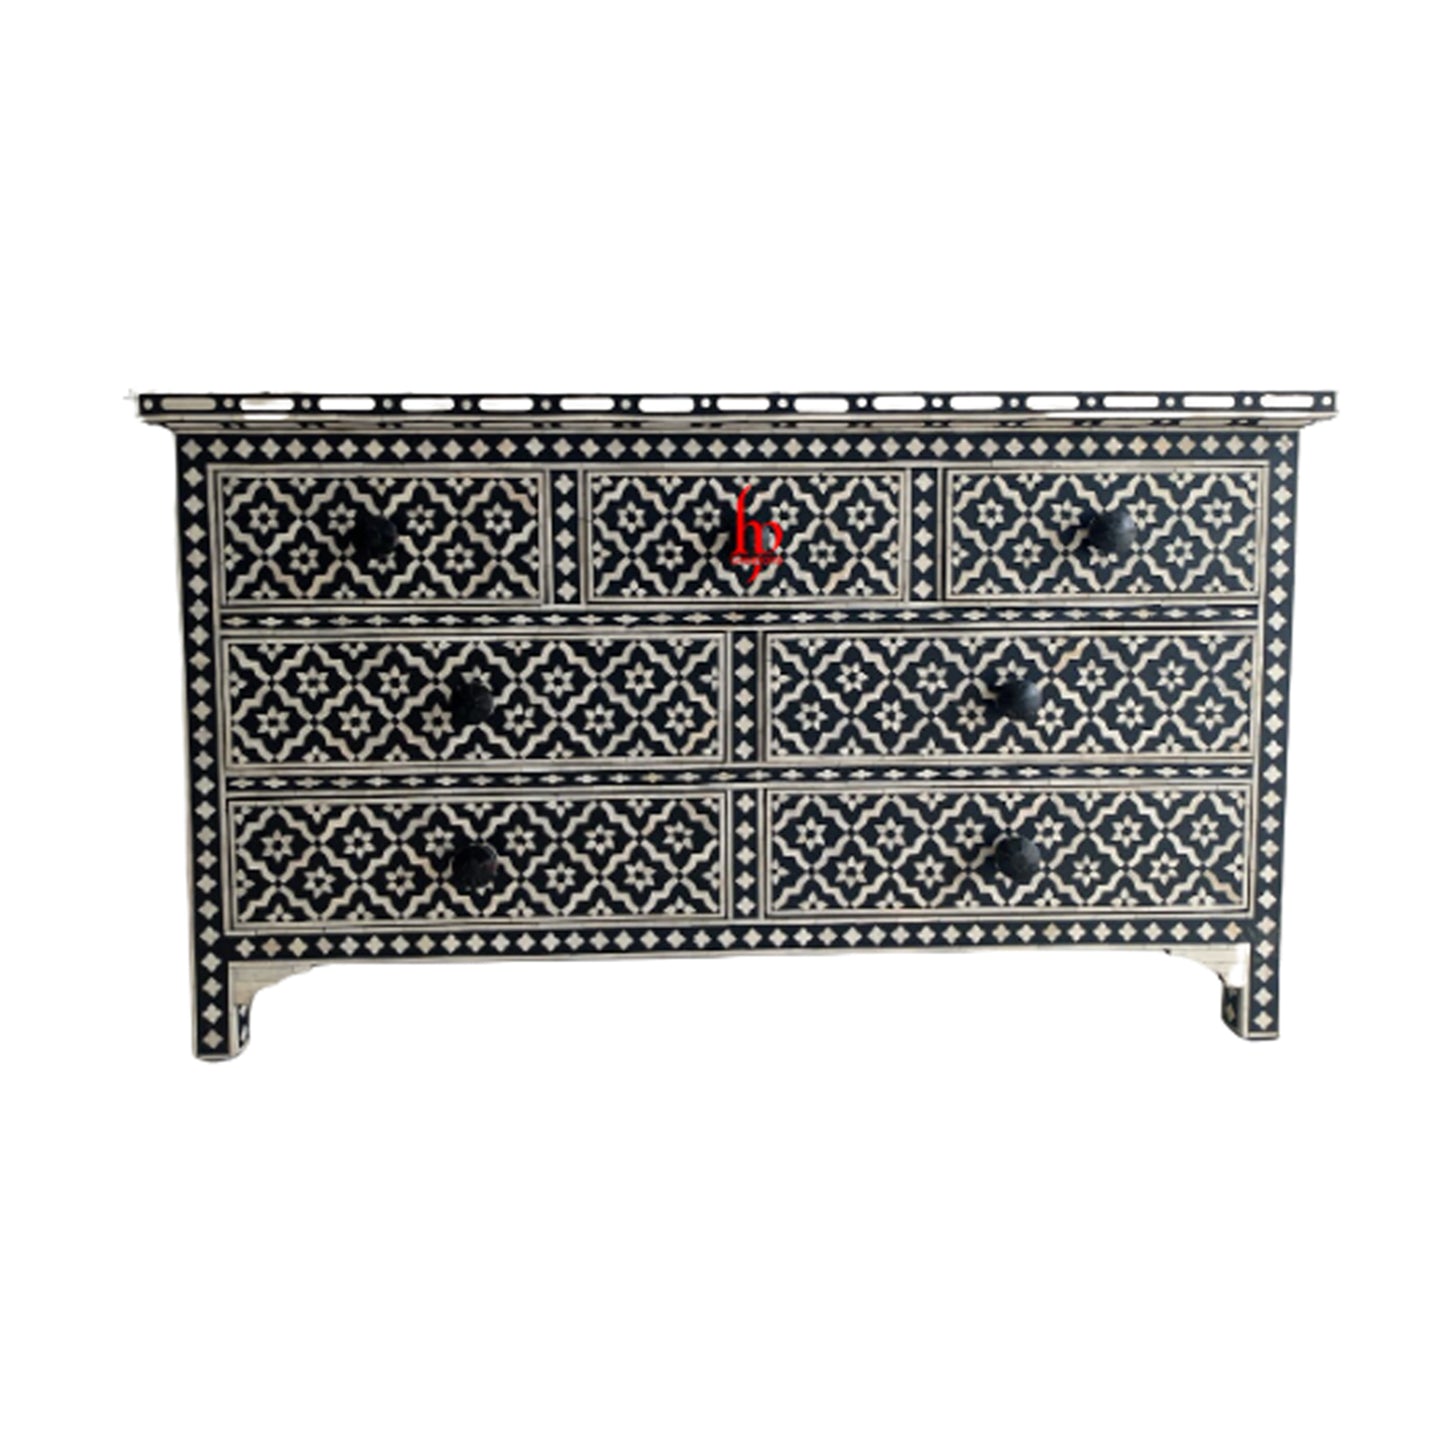 Personalized Handmade Bone Inlay 7 Chest Of Drawers Beautifully Crafted Home Decor Inlay Furniture